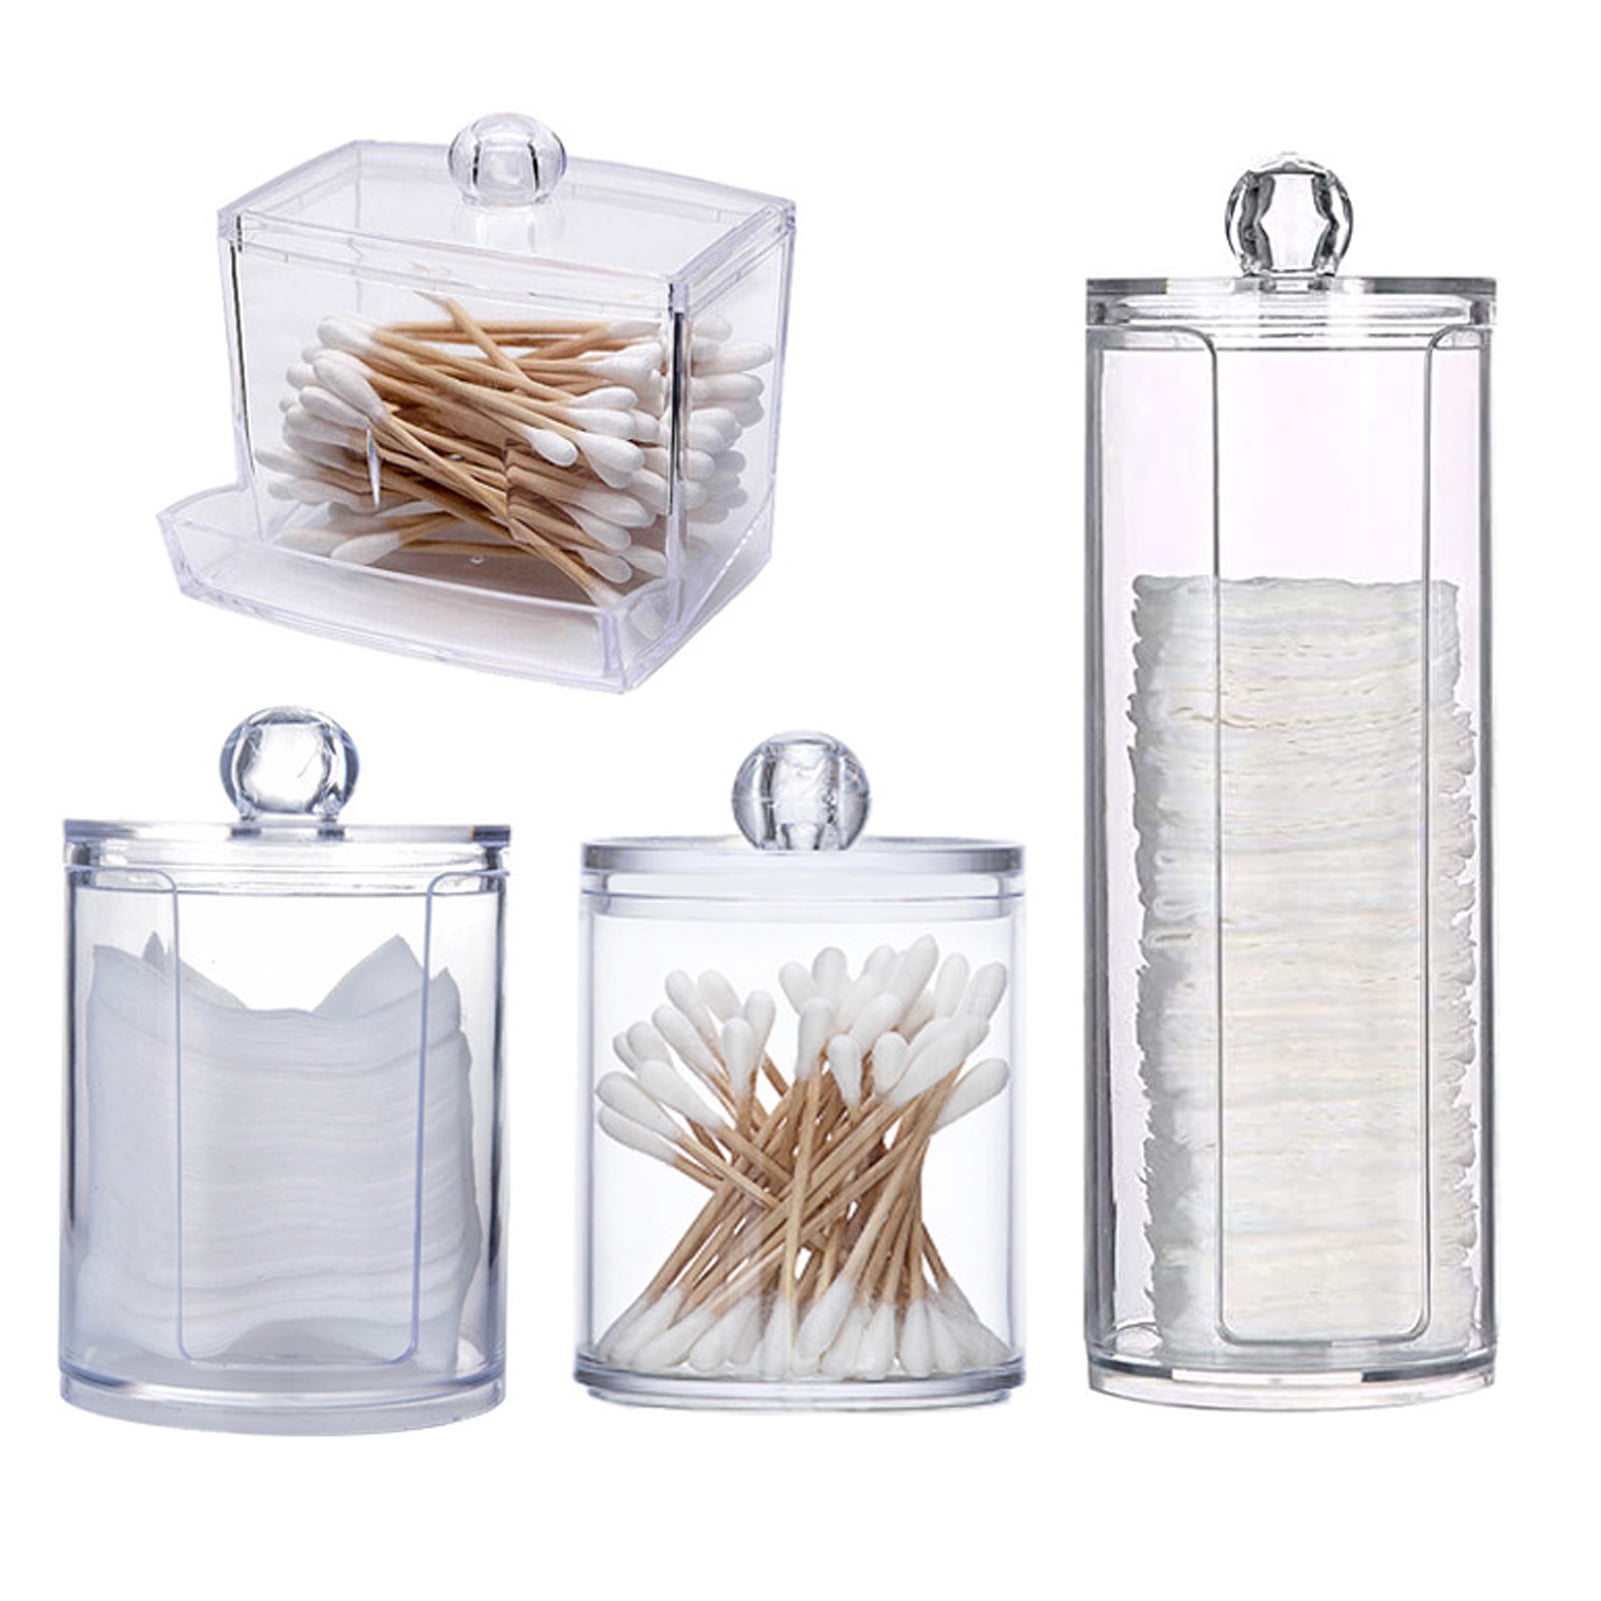 Bathroom Containers Clear Apothecary Jar for Storage Cotton Buds Ball Dispenser Cotton Swab Pads Holder 